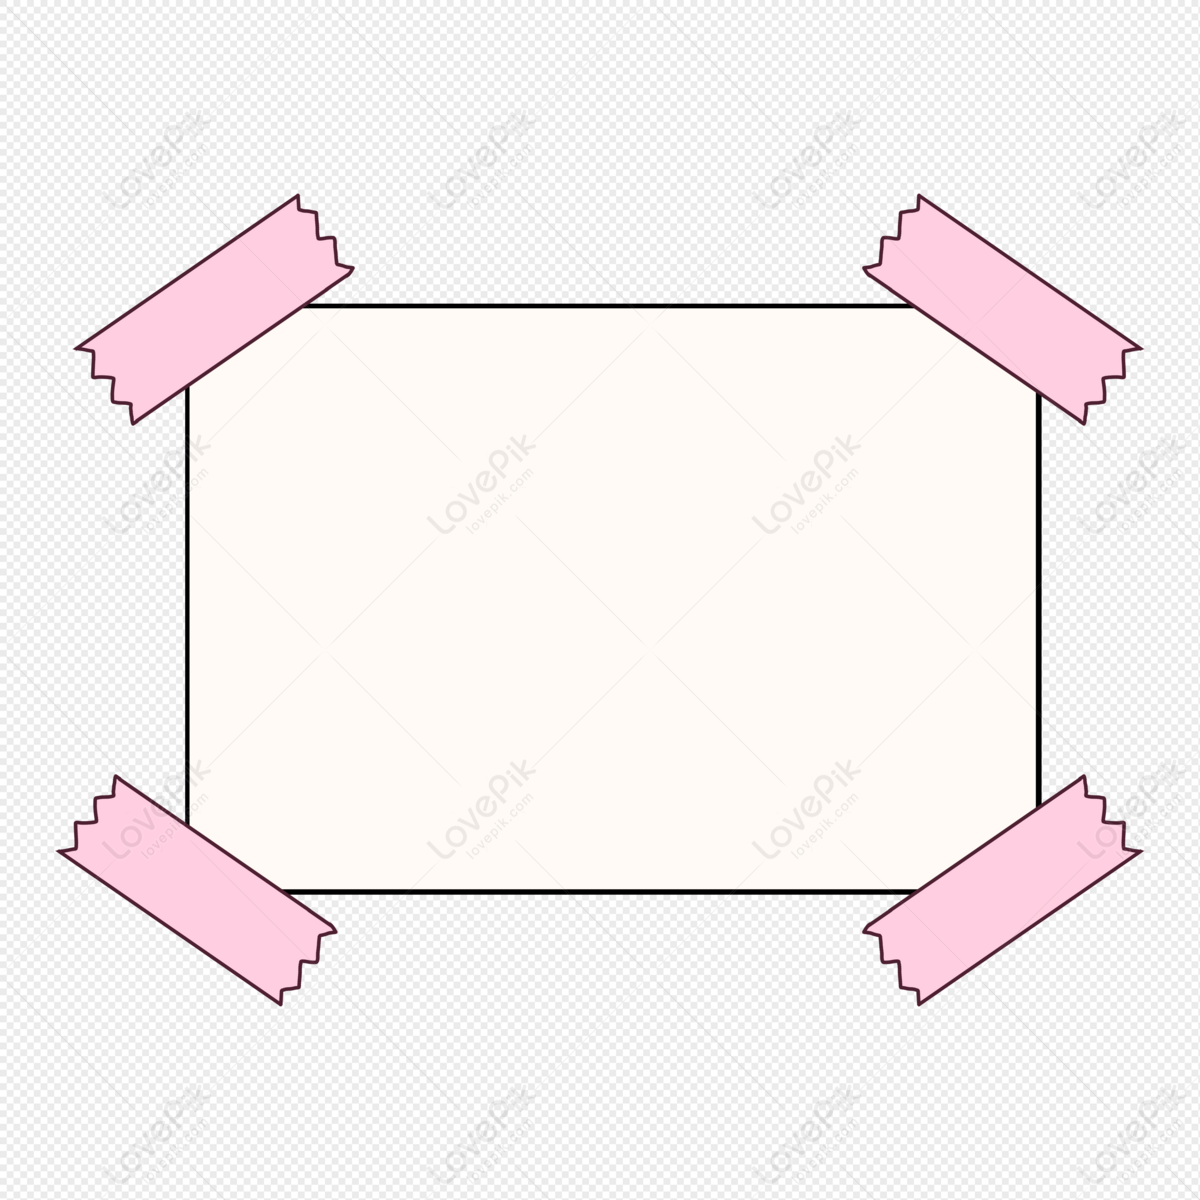 Tape Sticker Border PNG Free Download And Clipart Image For Free ...